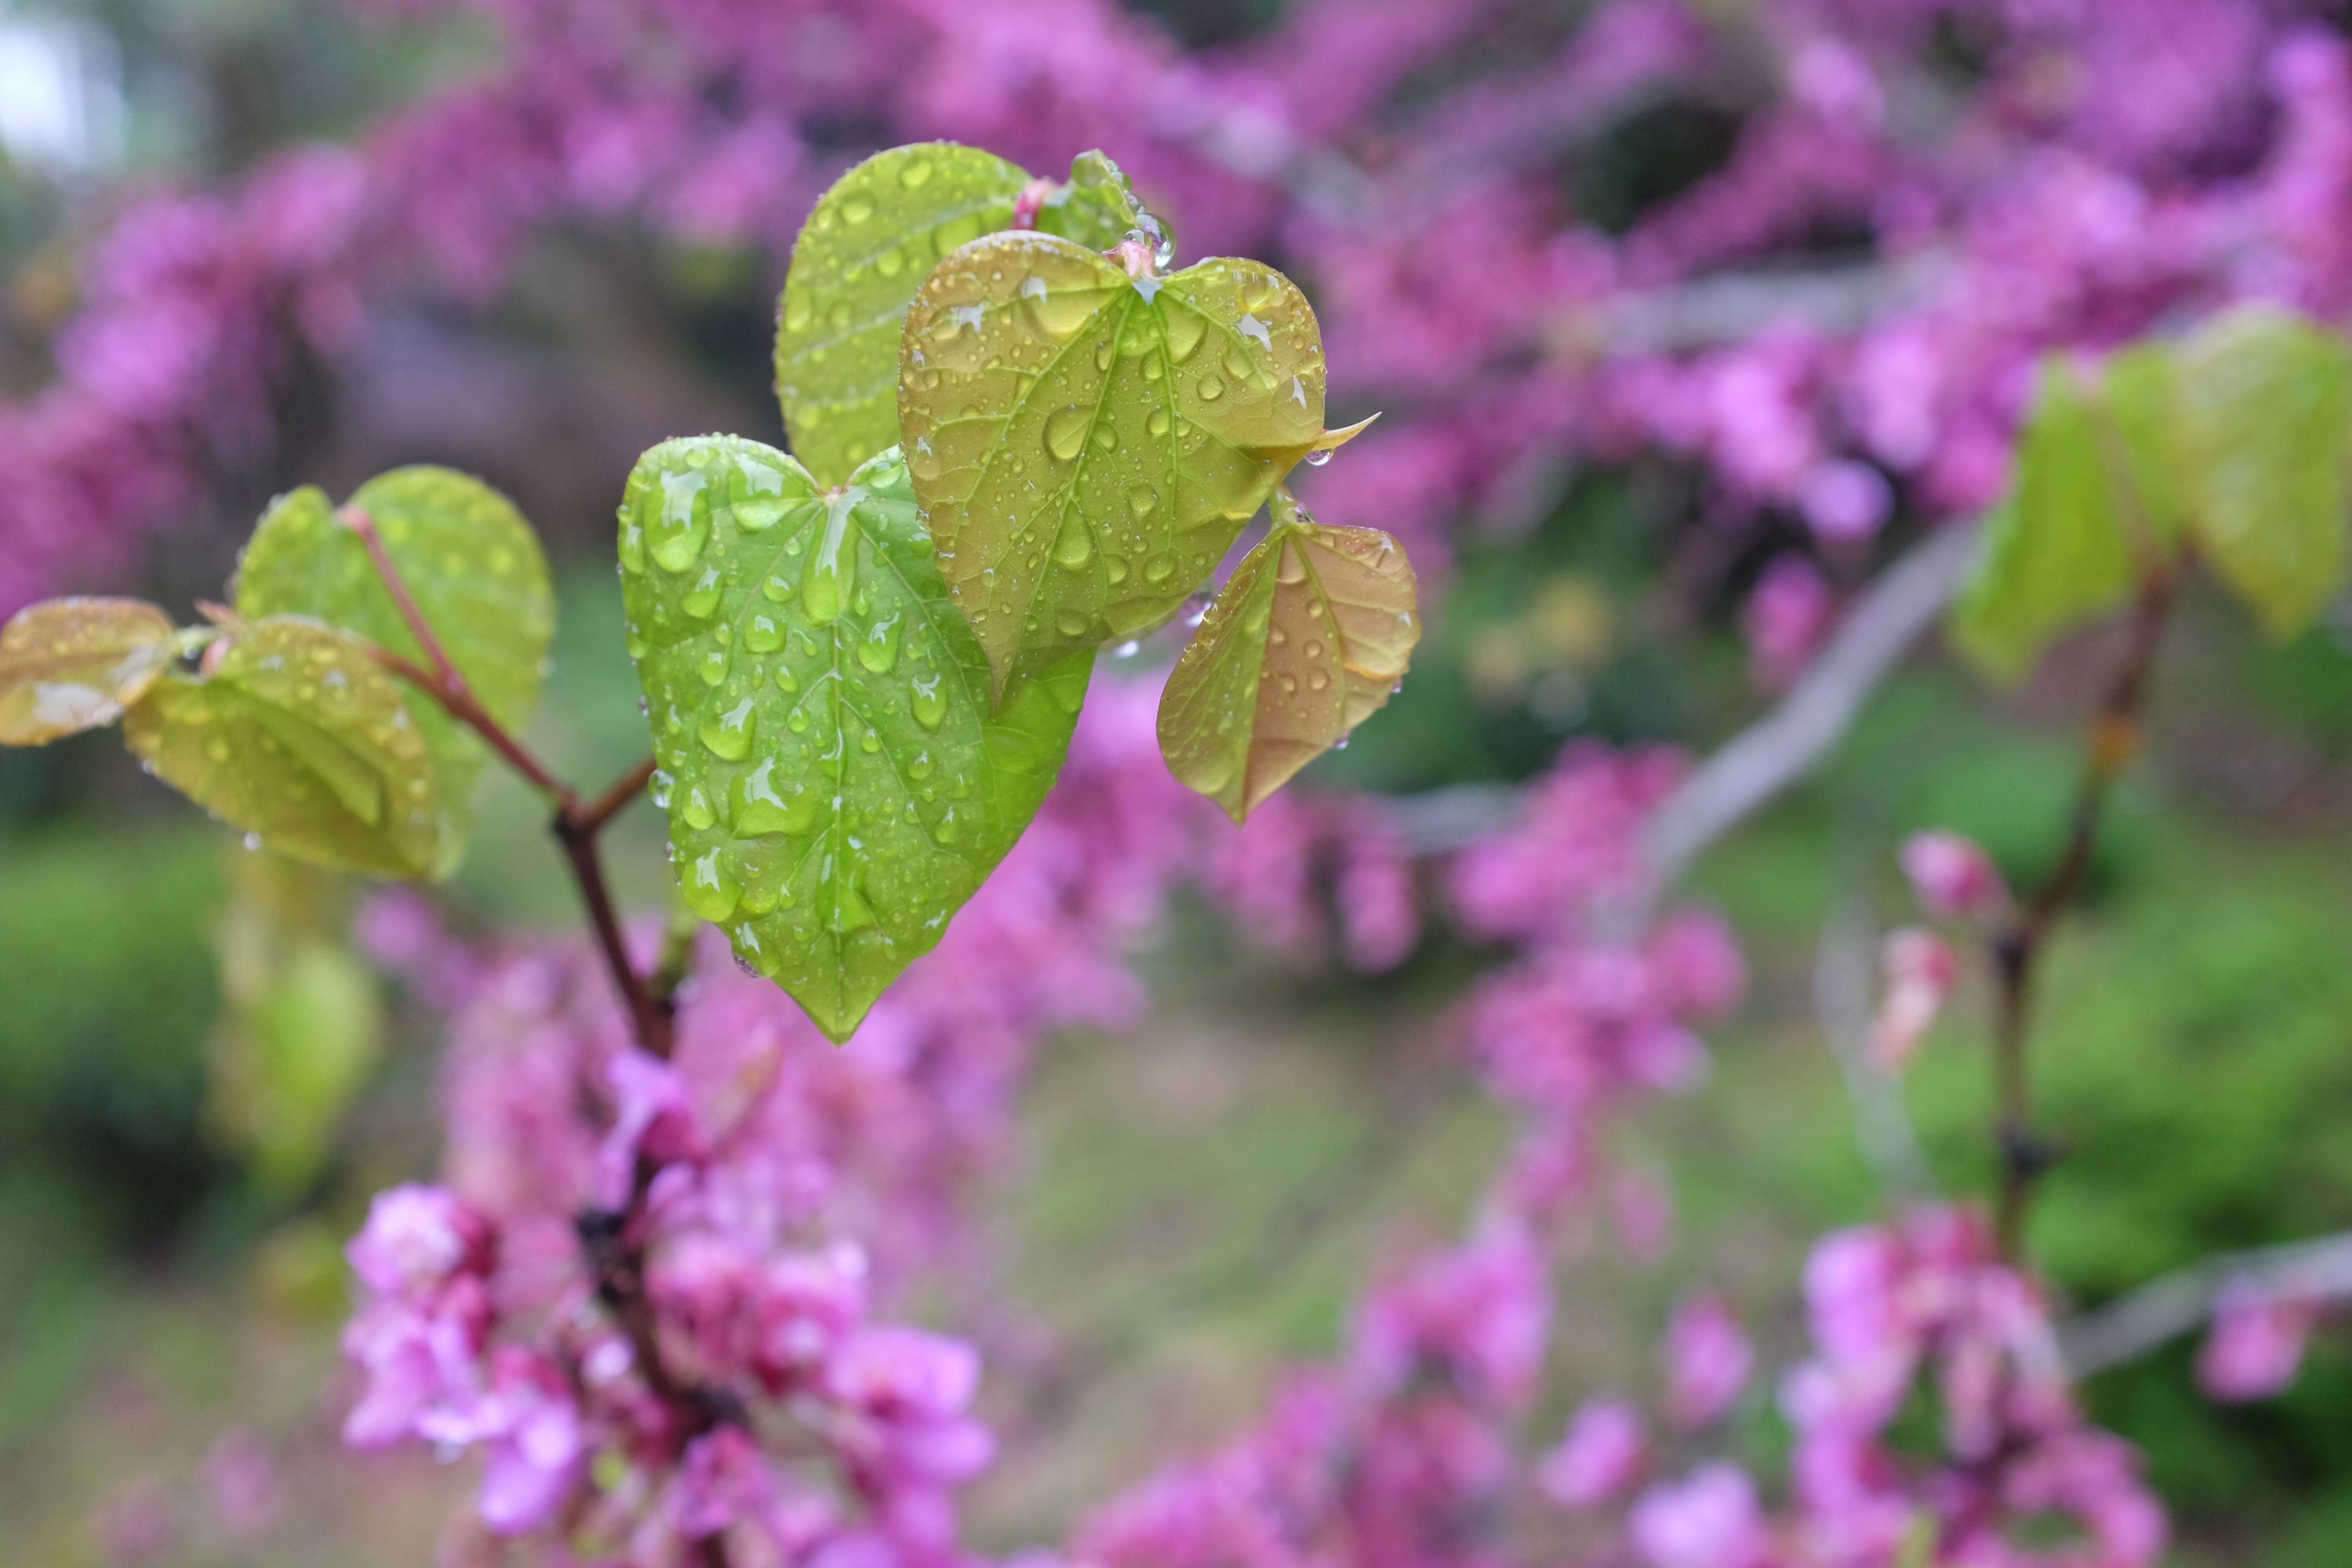 The fresh leaves of a wisteria plant covered with drops of rain.